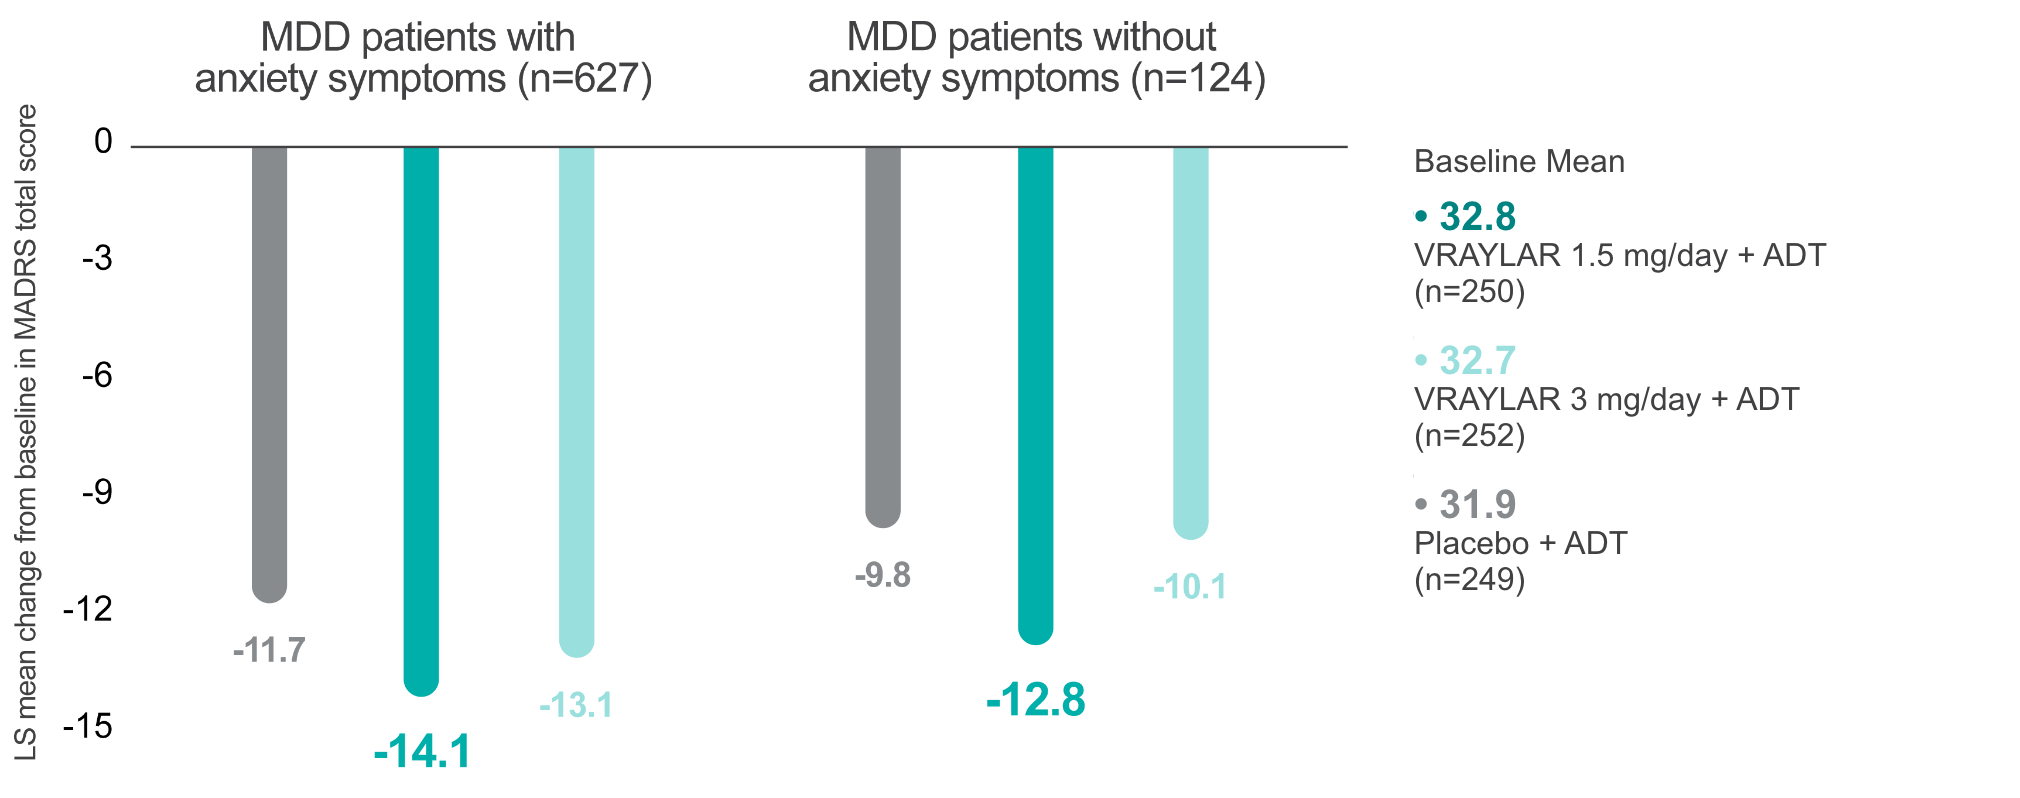 Bar graph showing change from baseline in MADRS total score in MDD patients with and without anxiety post-hoc analysis.